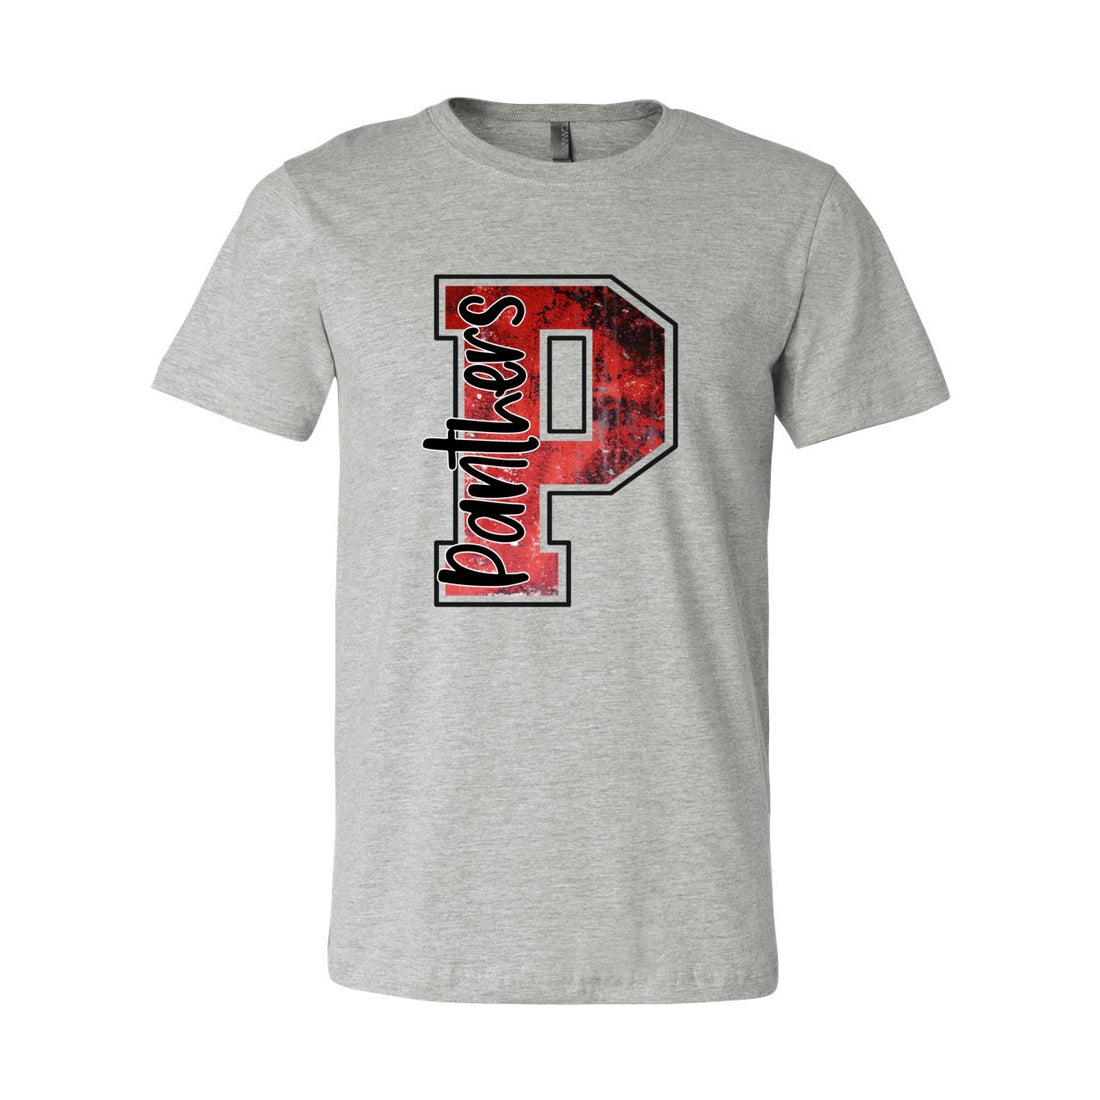 P is for Panthers Short Sleeve Jersey Tee - T-Shirts - Positively Sassy - P is for Panthers Short Sleeve Jersey Tee